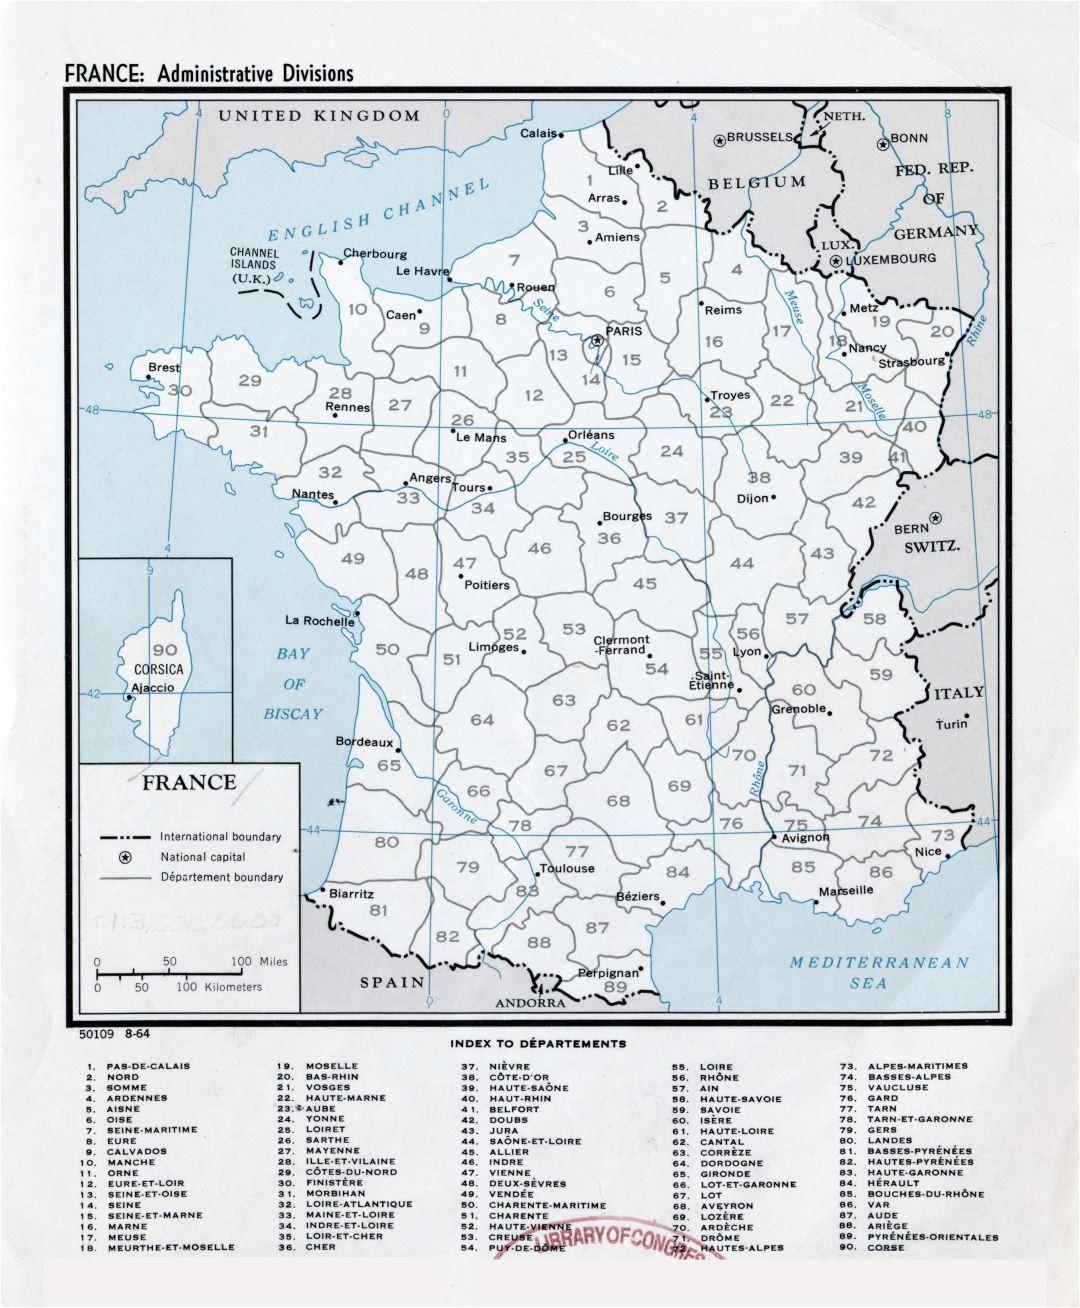 Large scale administrative divisions map of France - 1964